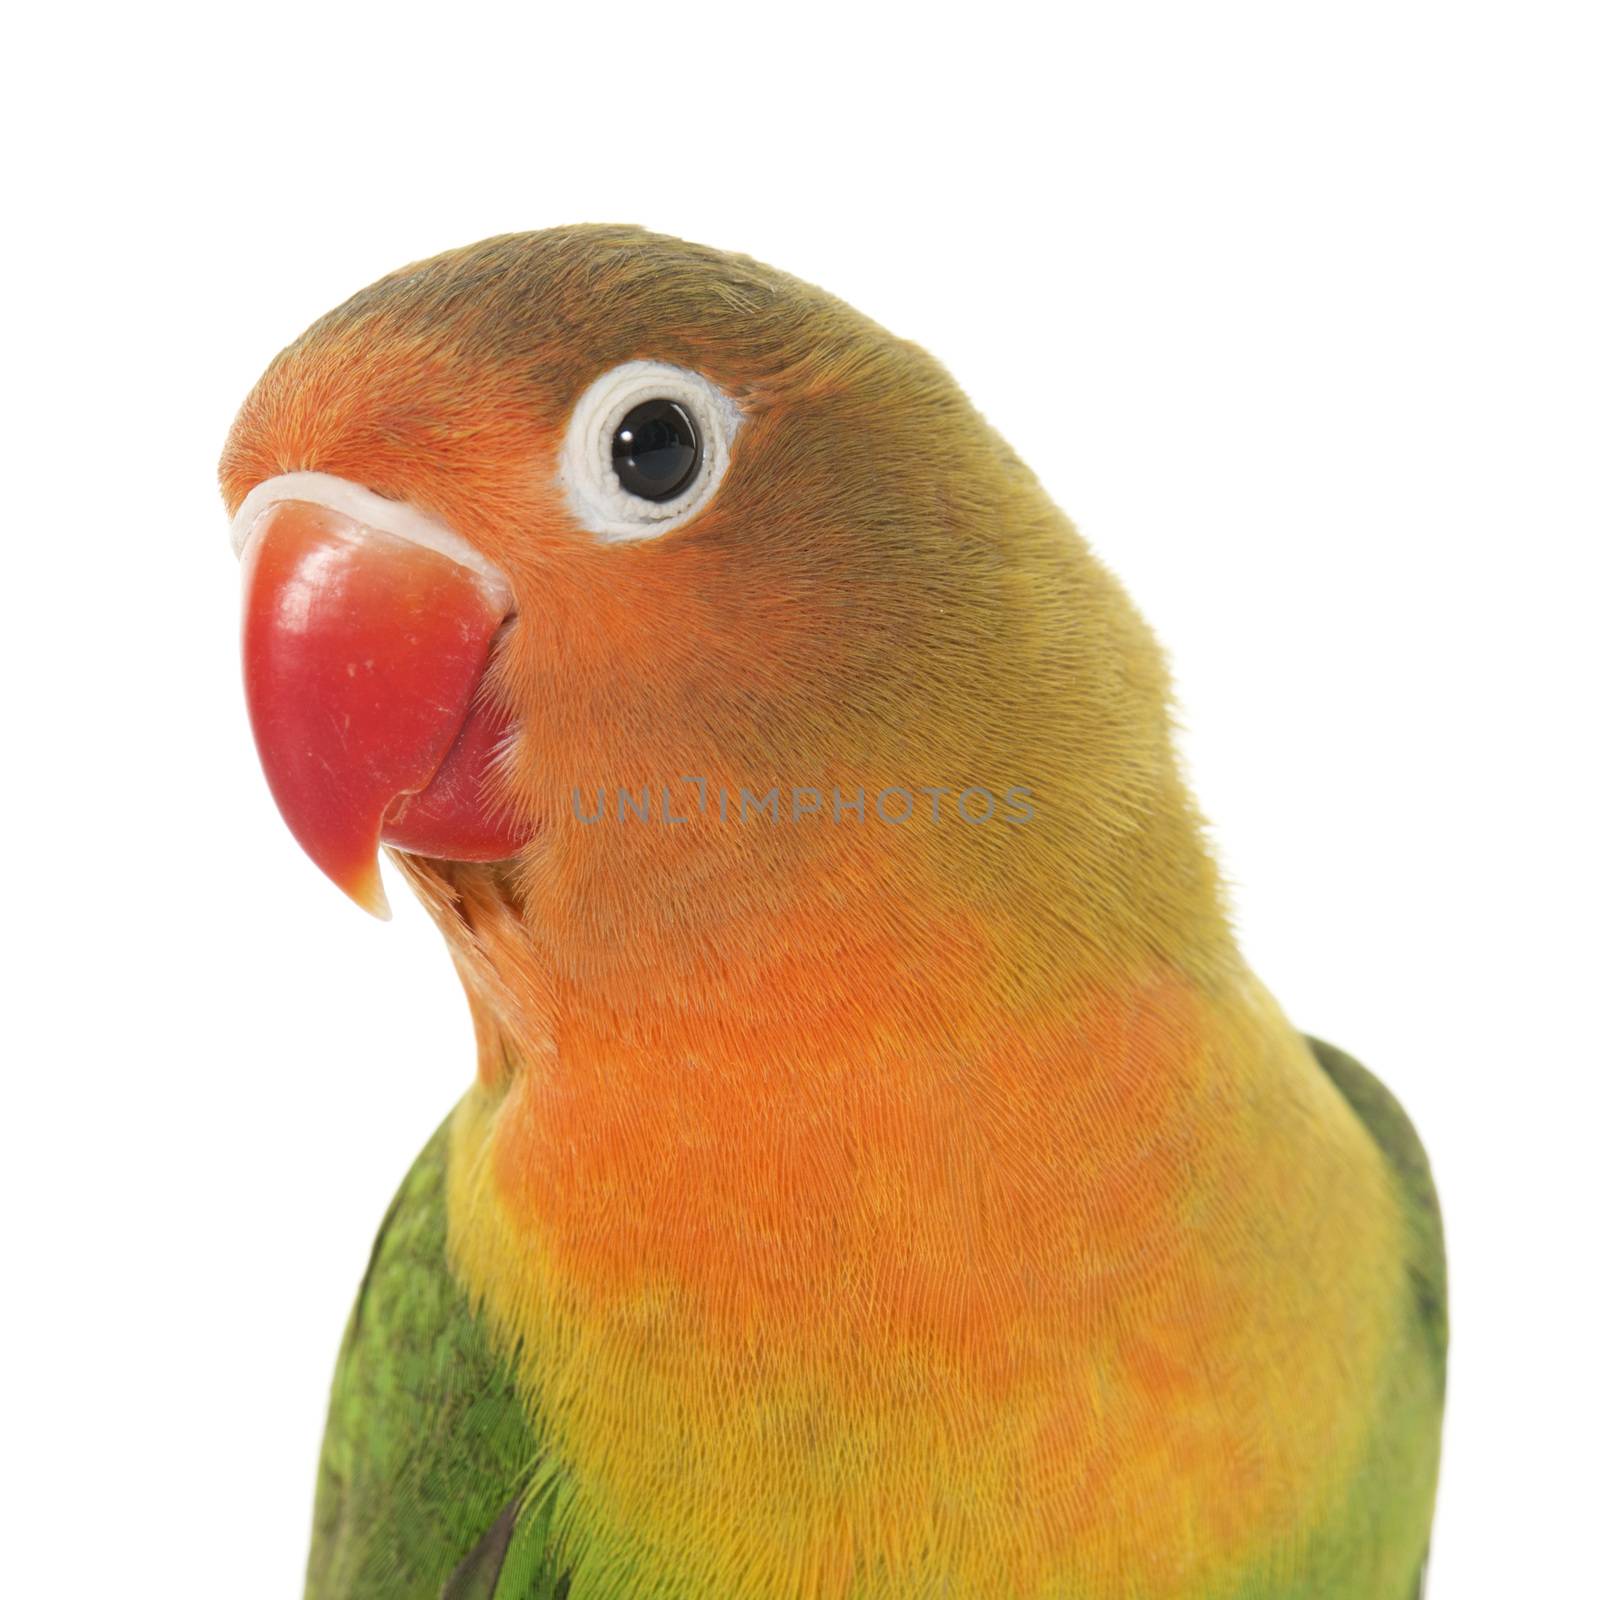 Young fischeri lovebird in front of white background

